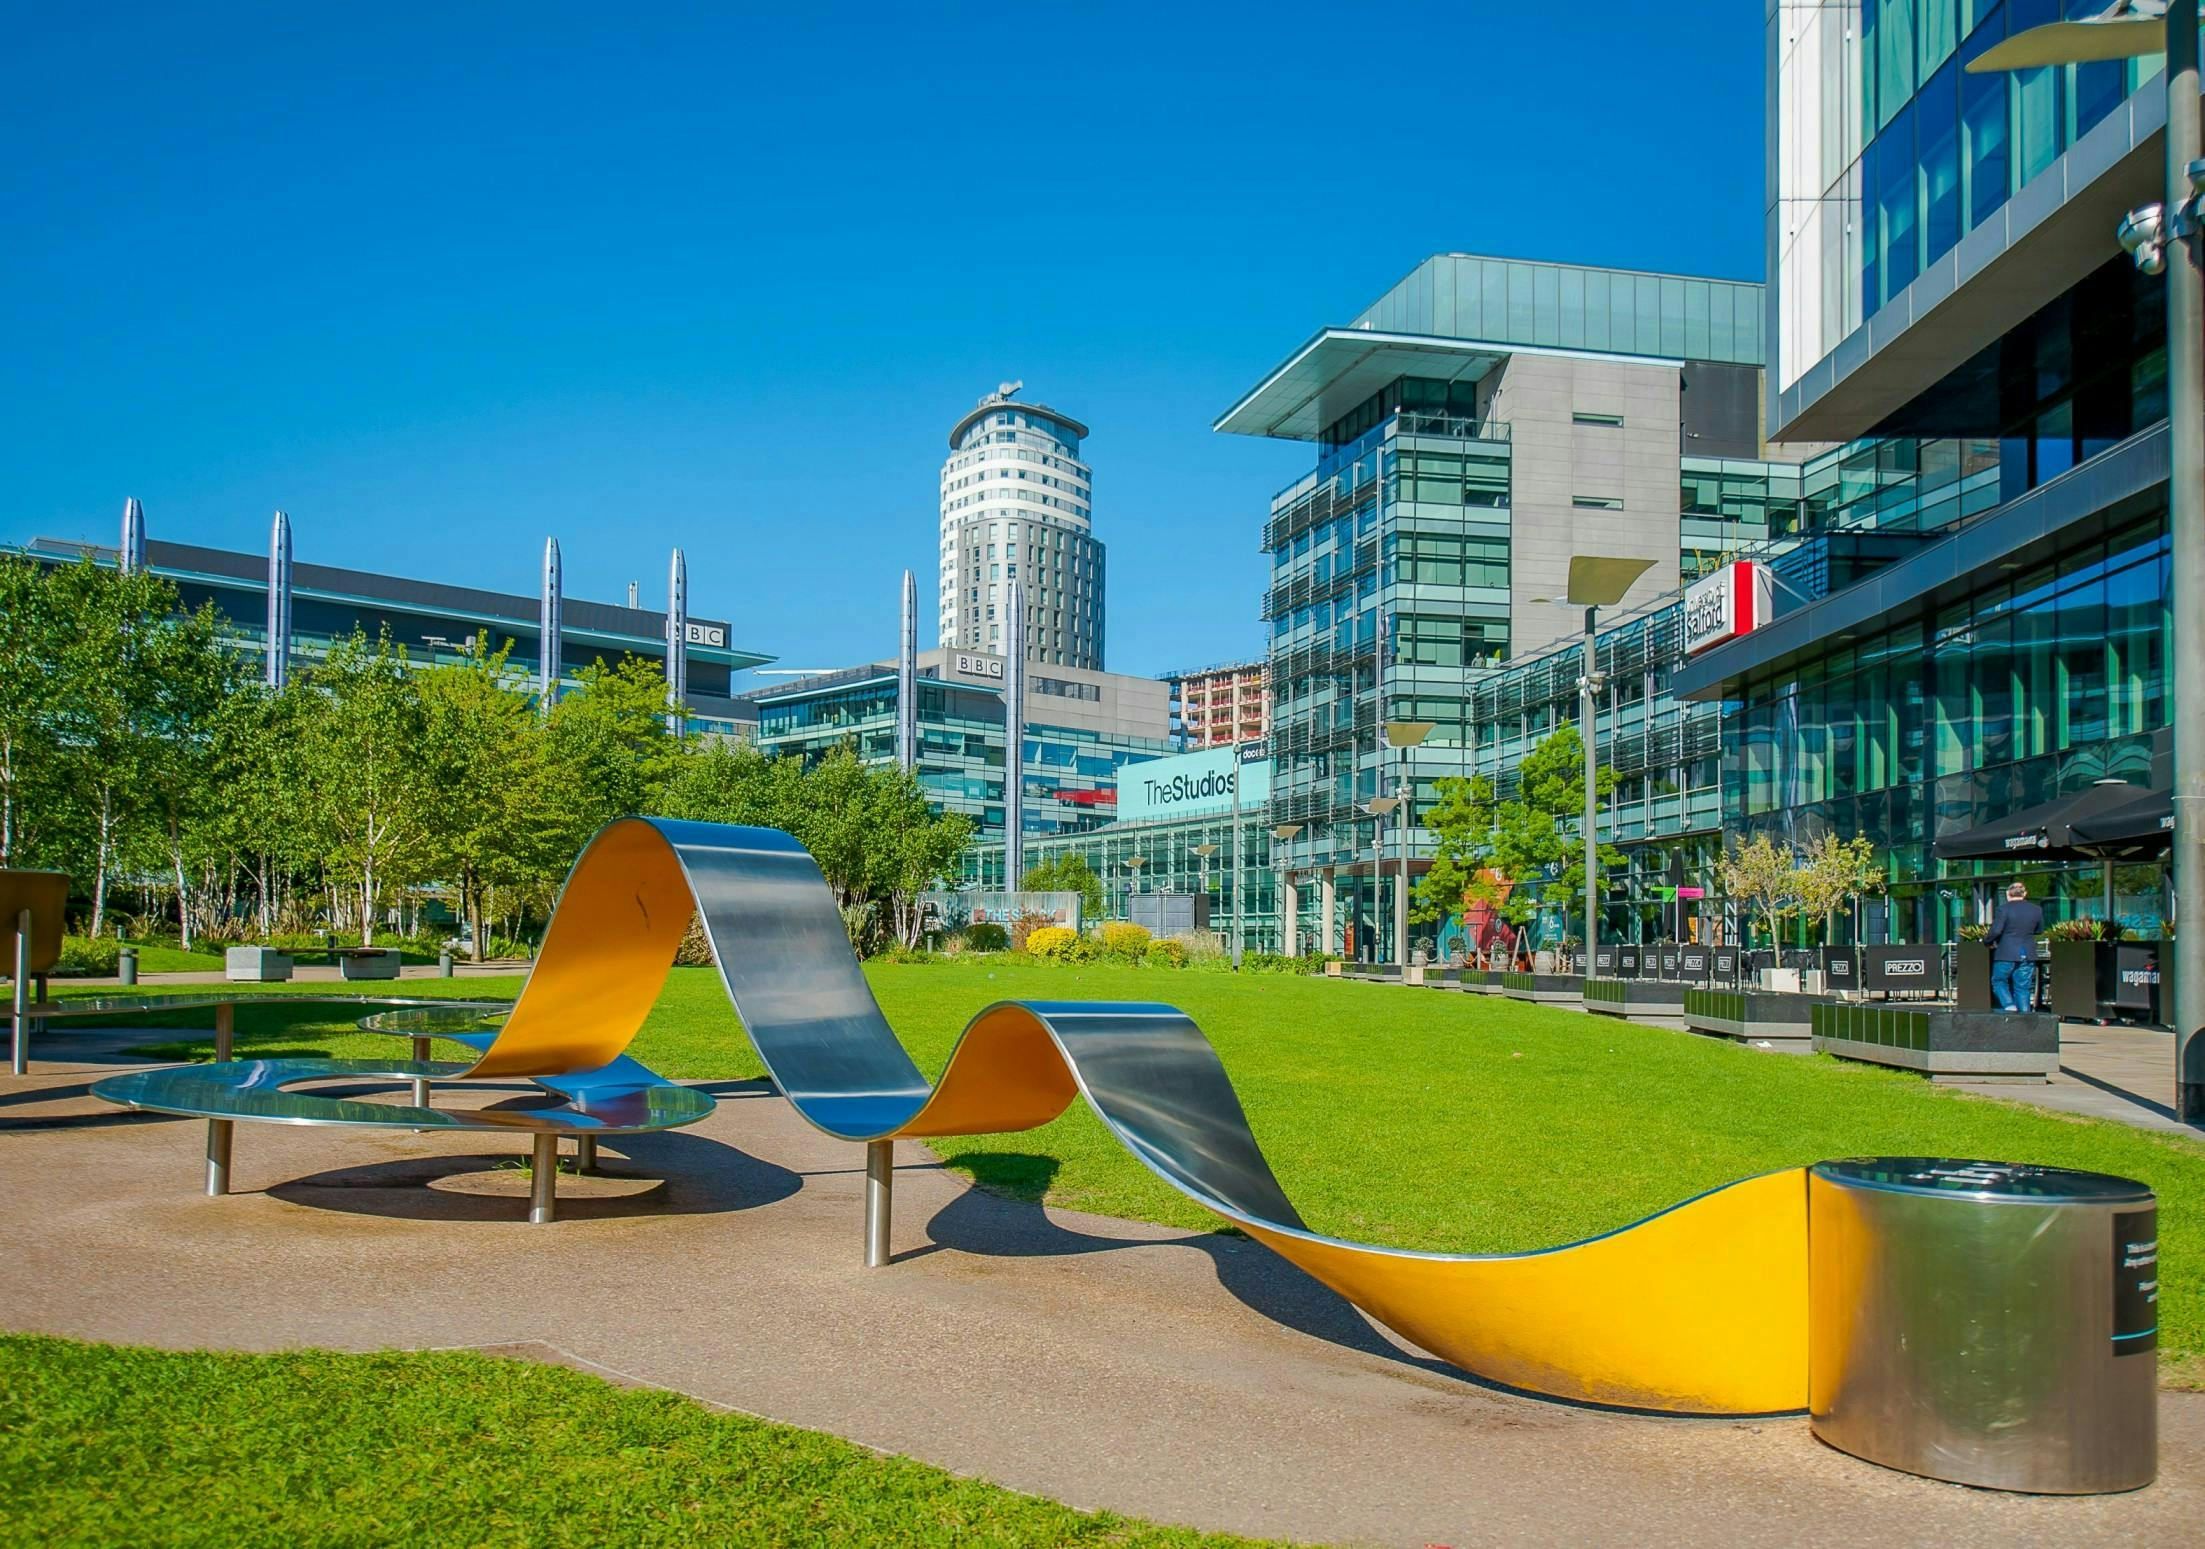 Image of a sunny day with glass buildings in the background and a metallic sculpture in the foreground.